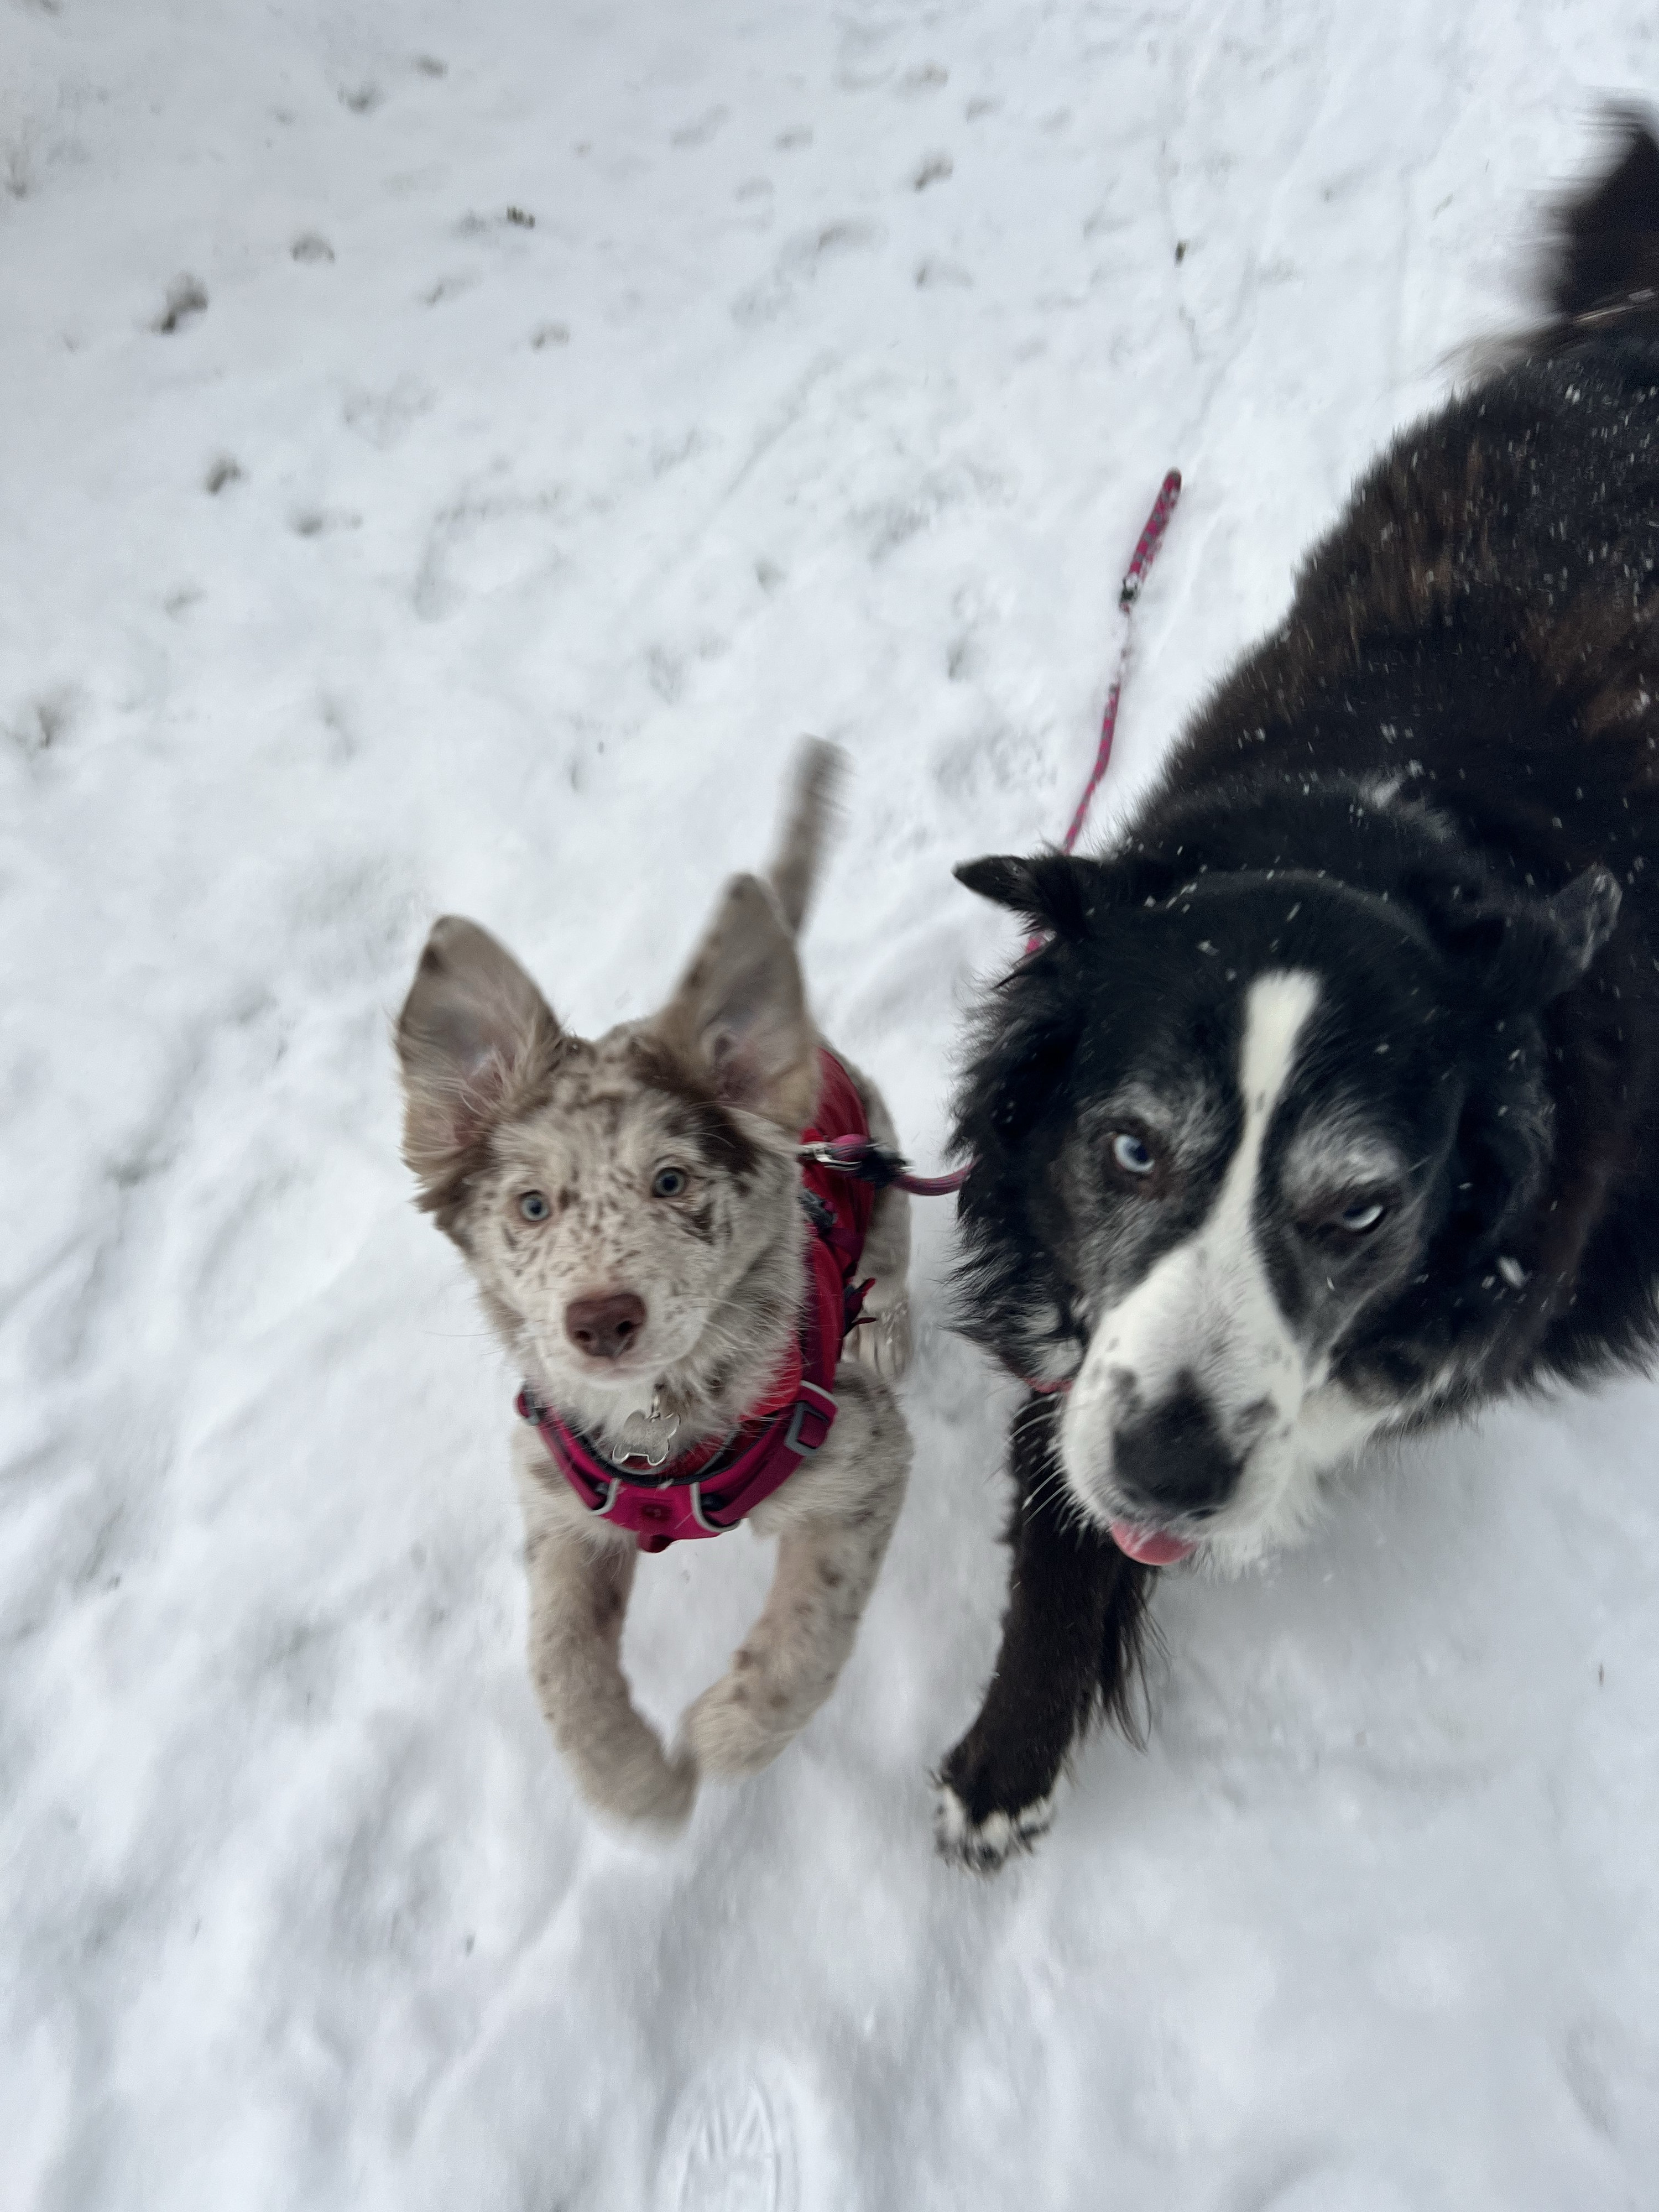 Two dogs running in the snow